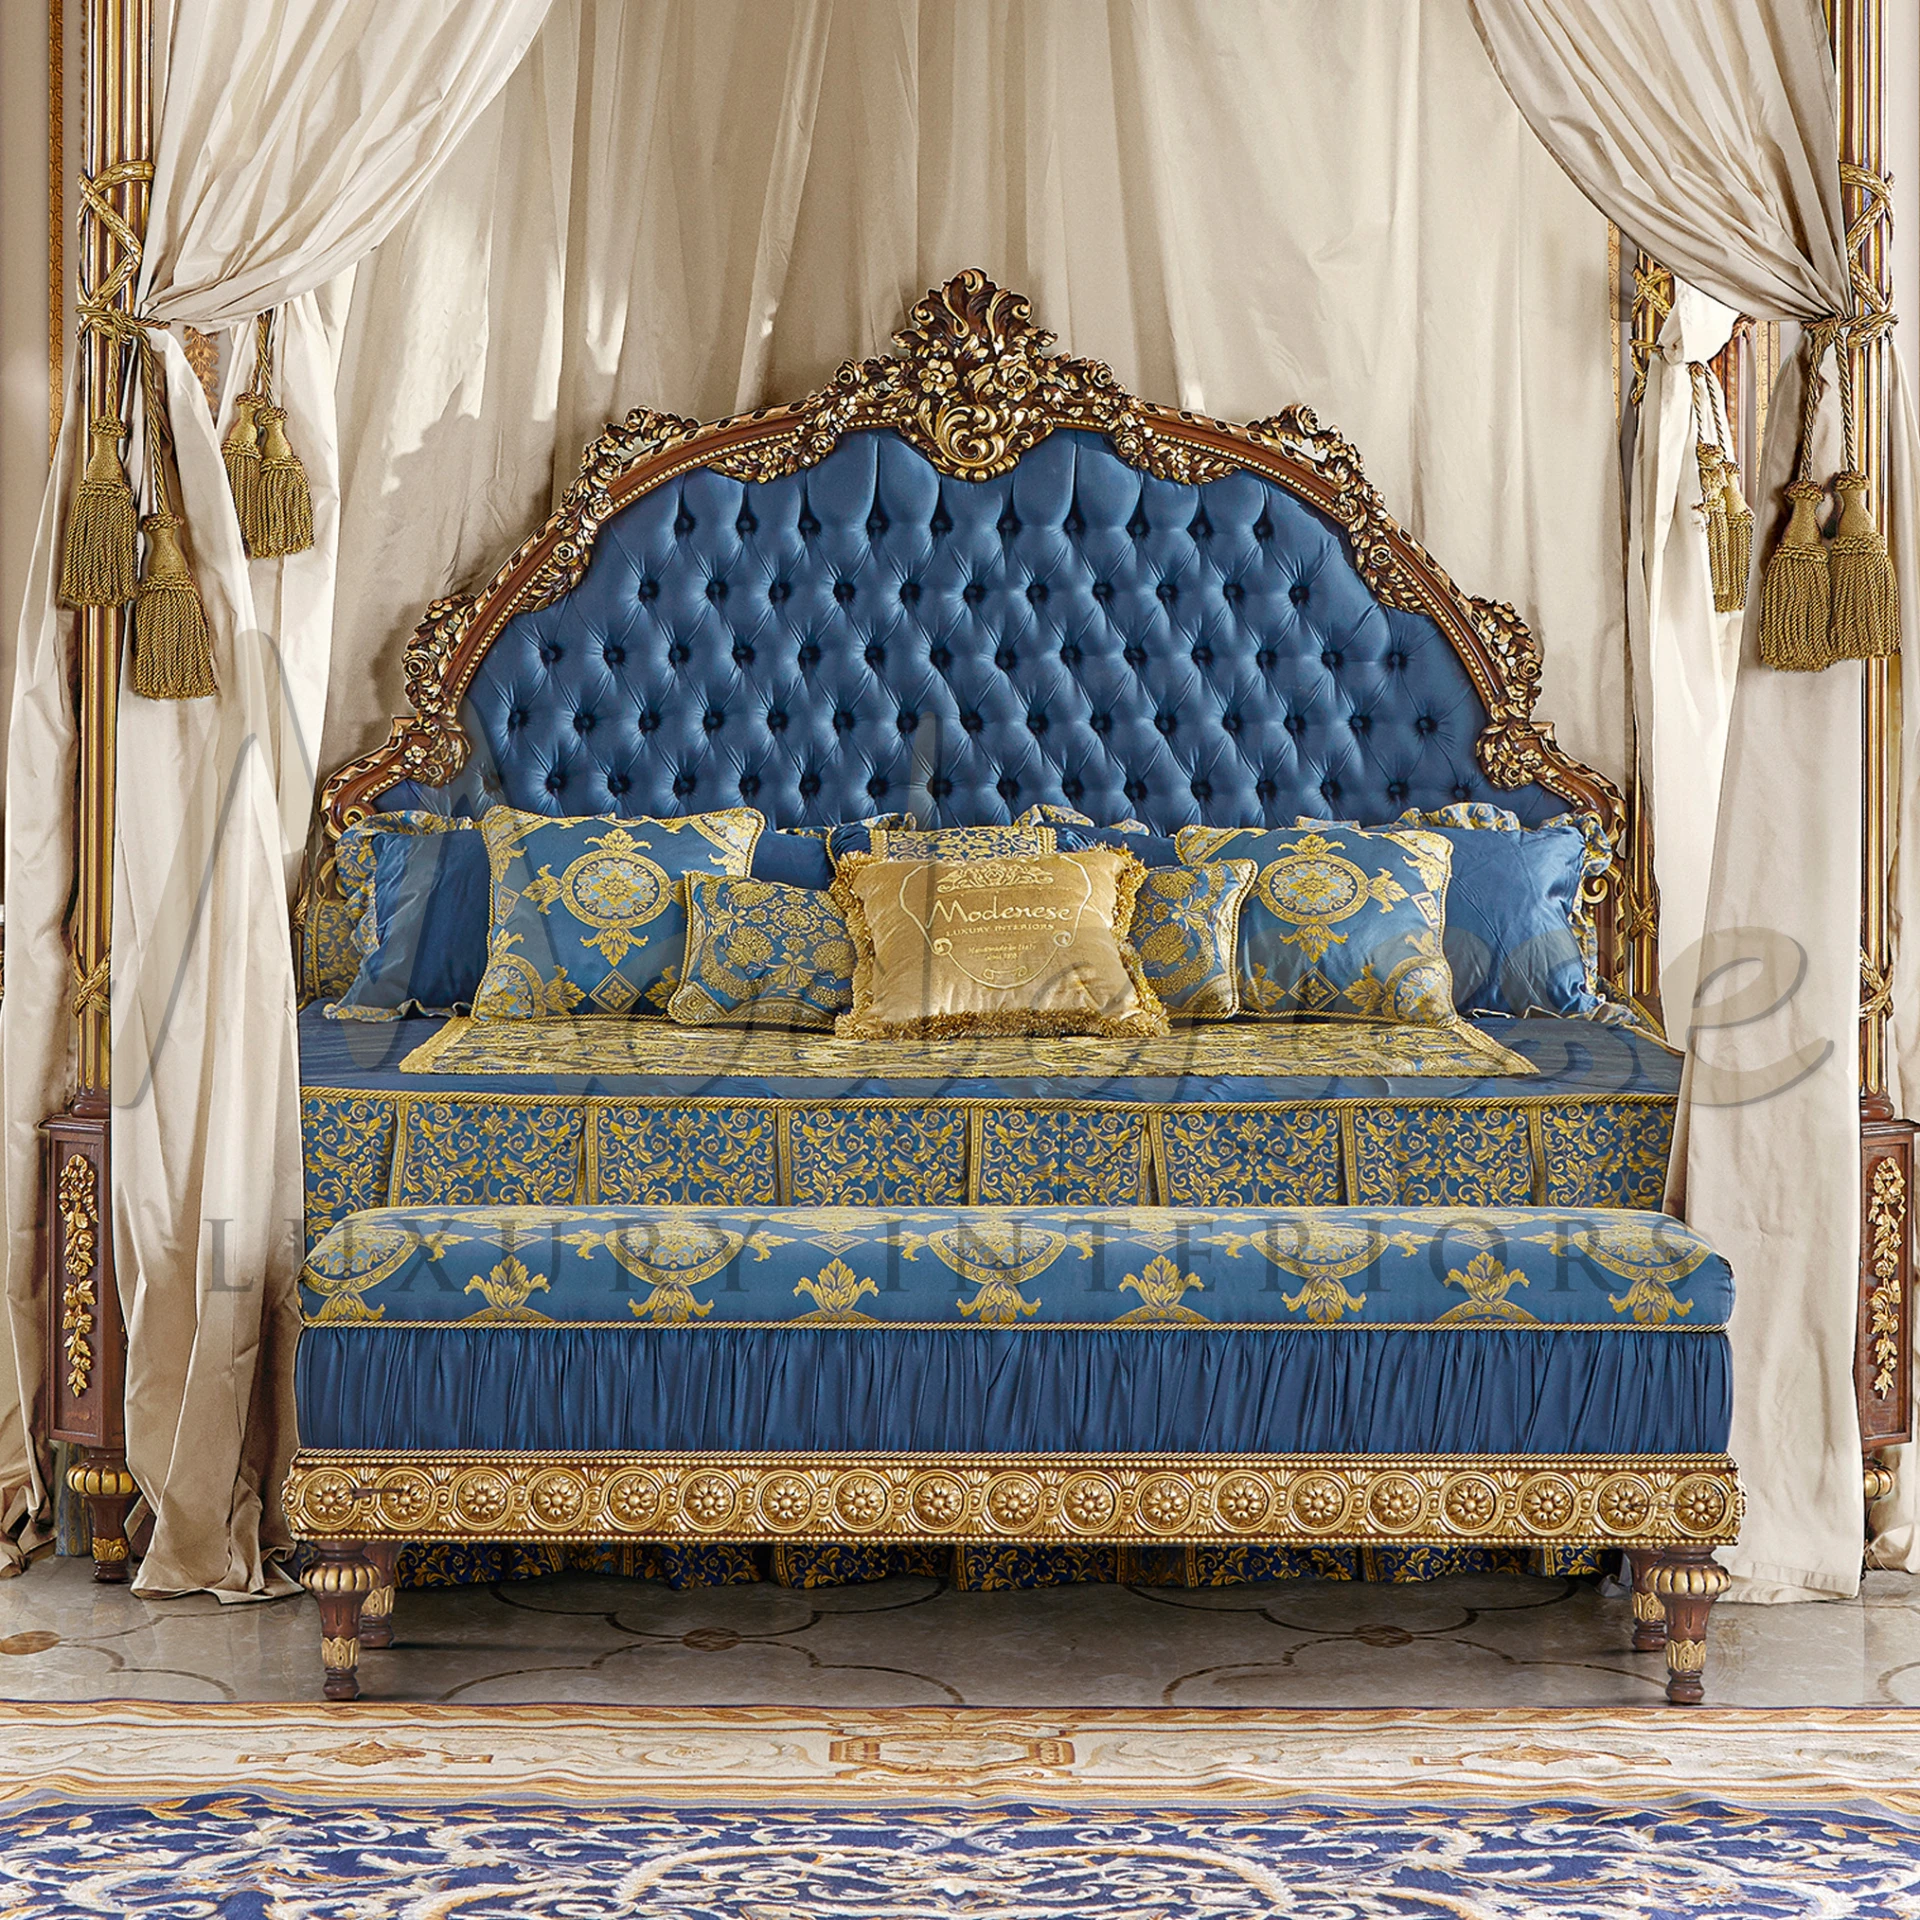 Enhance your bedroom decor with our Blue Upholstered Bed Bench, offering both style and practicality in one chic piece.